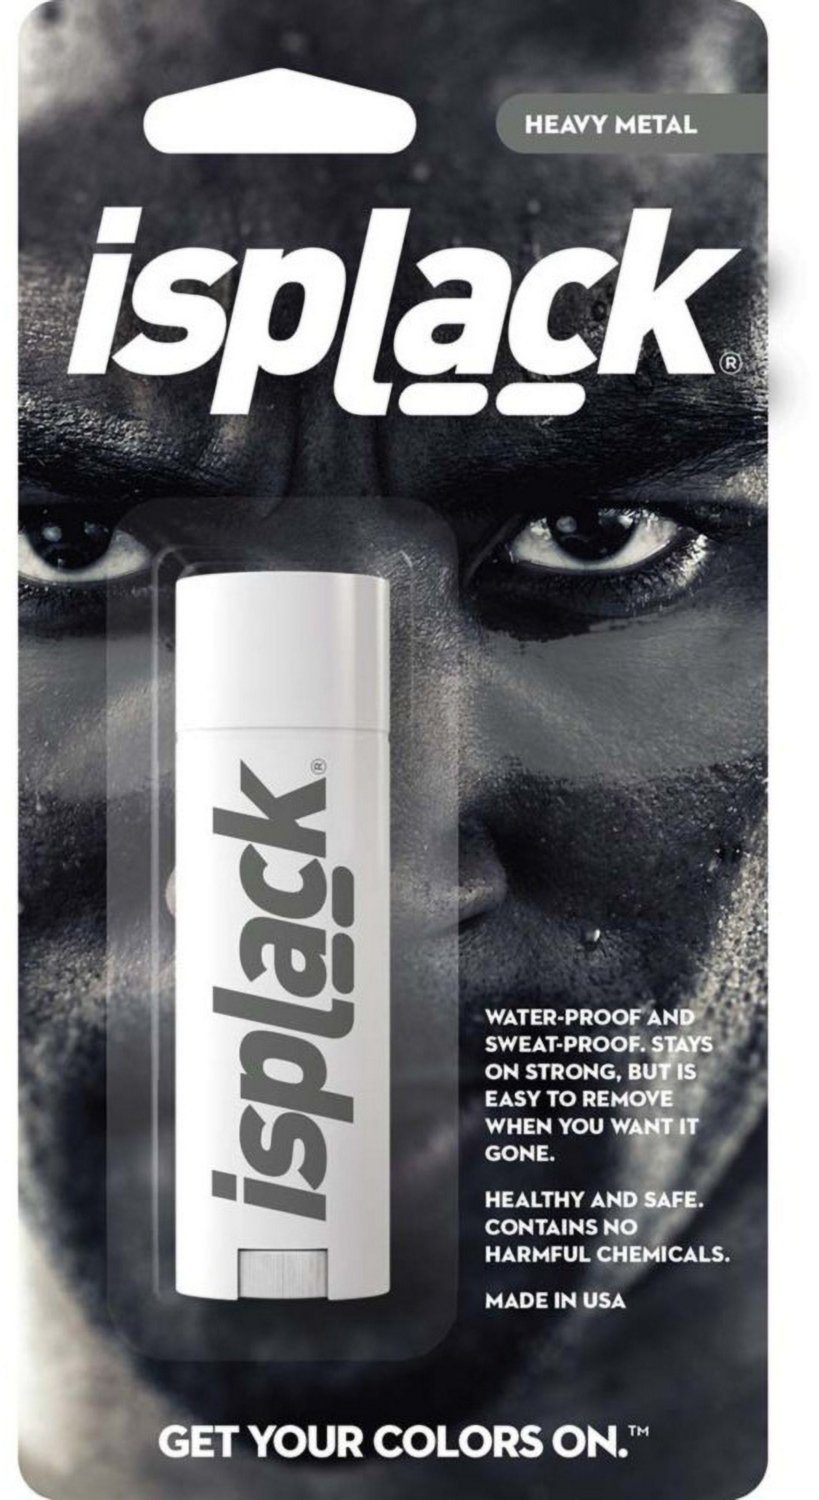 Sports Eye Black - Find The Perfect Color For You! – iSplack